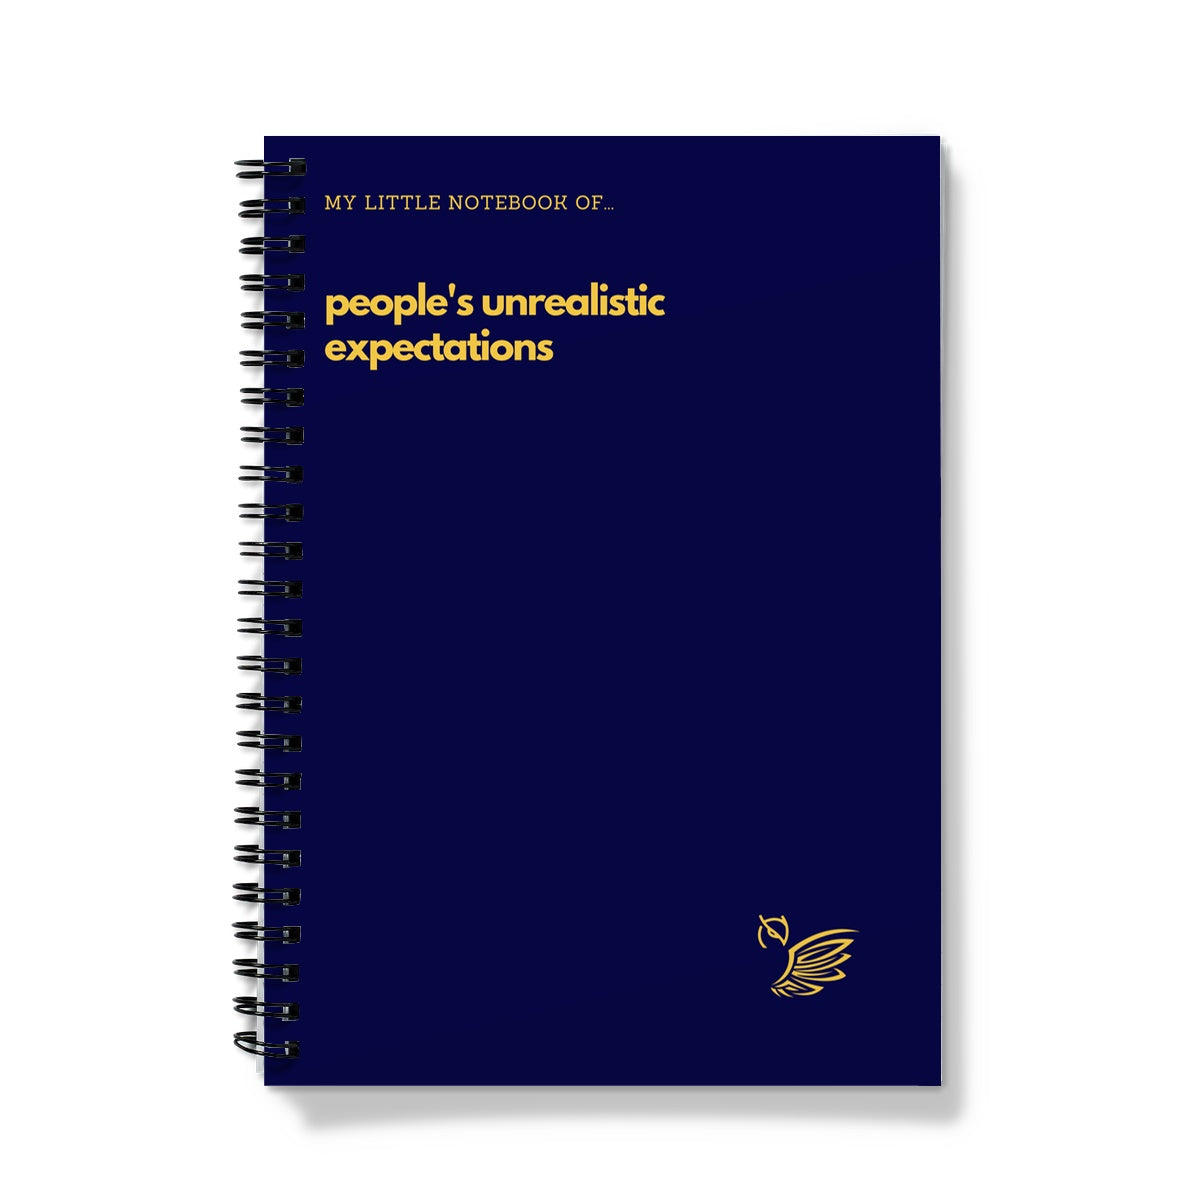 My Little Notebook Of... People's Unrealistic Expectations Notebook